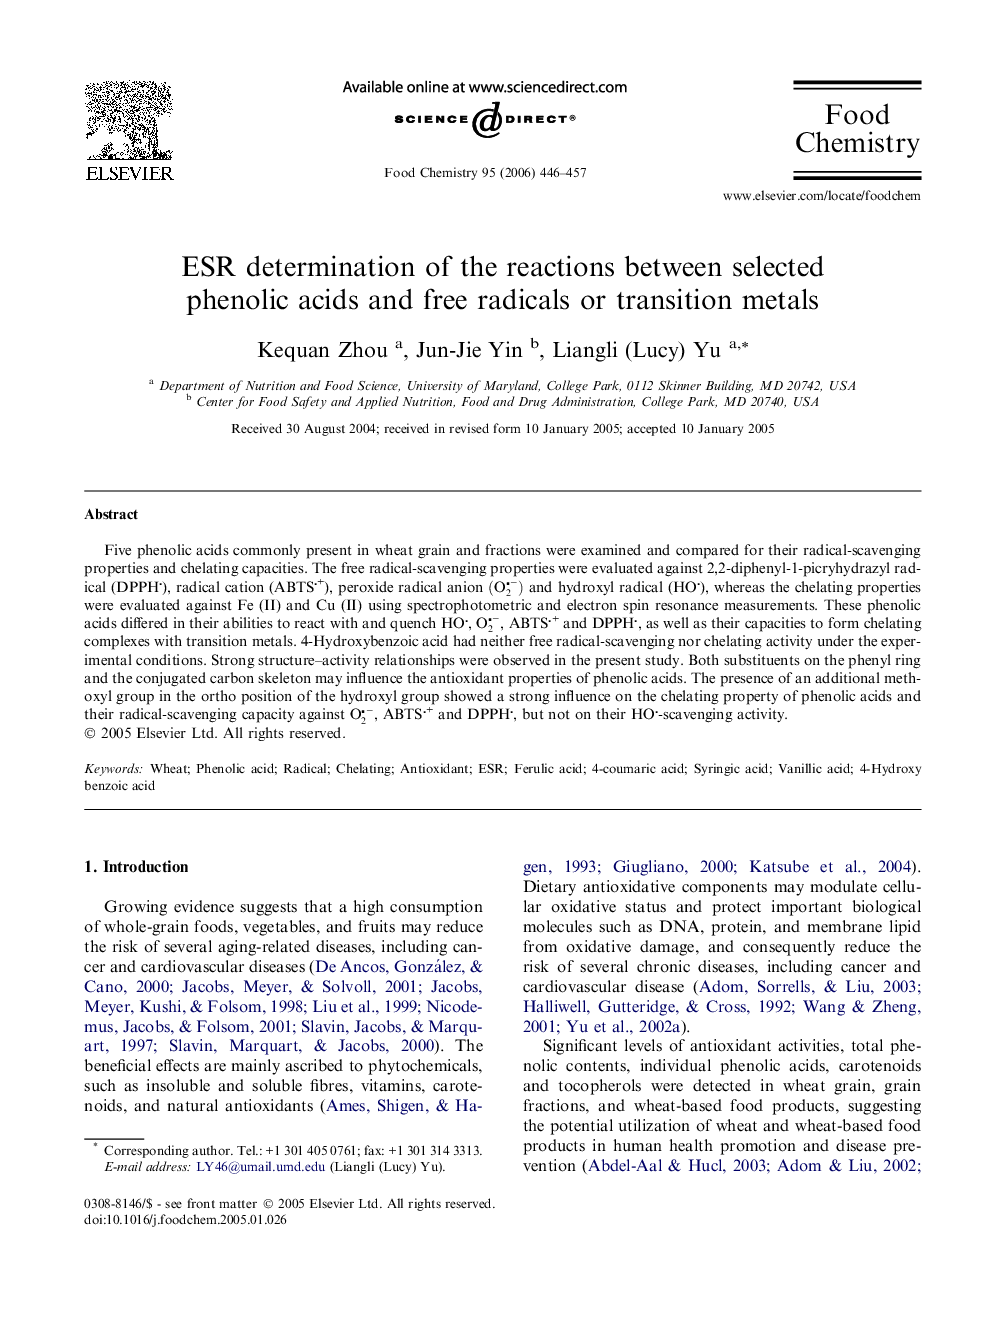 ESR determination of the reactions between selected phenolic acids and free radicals or transition metals